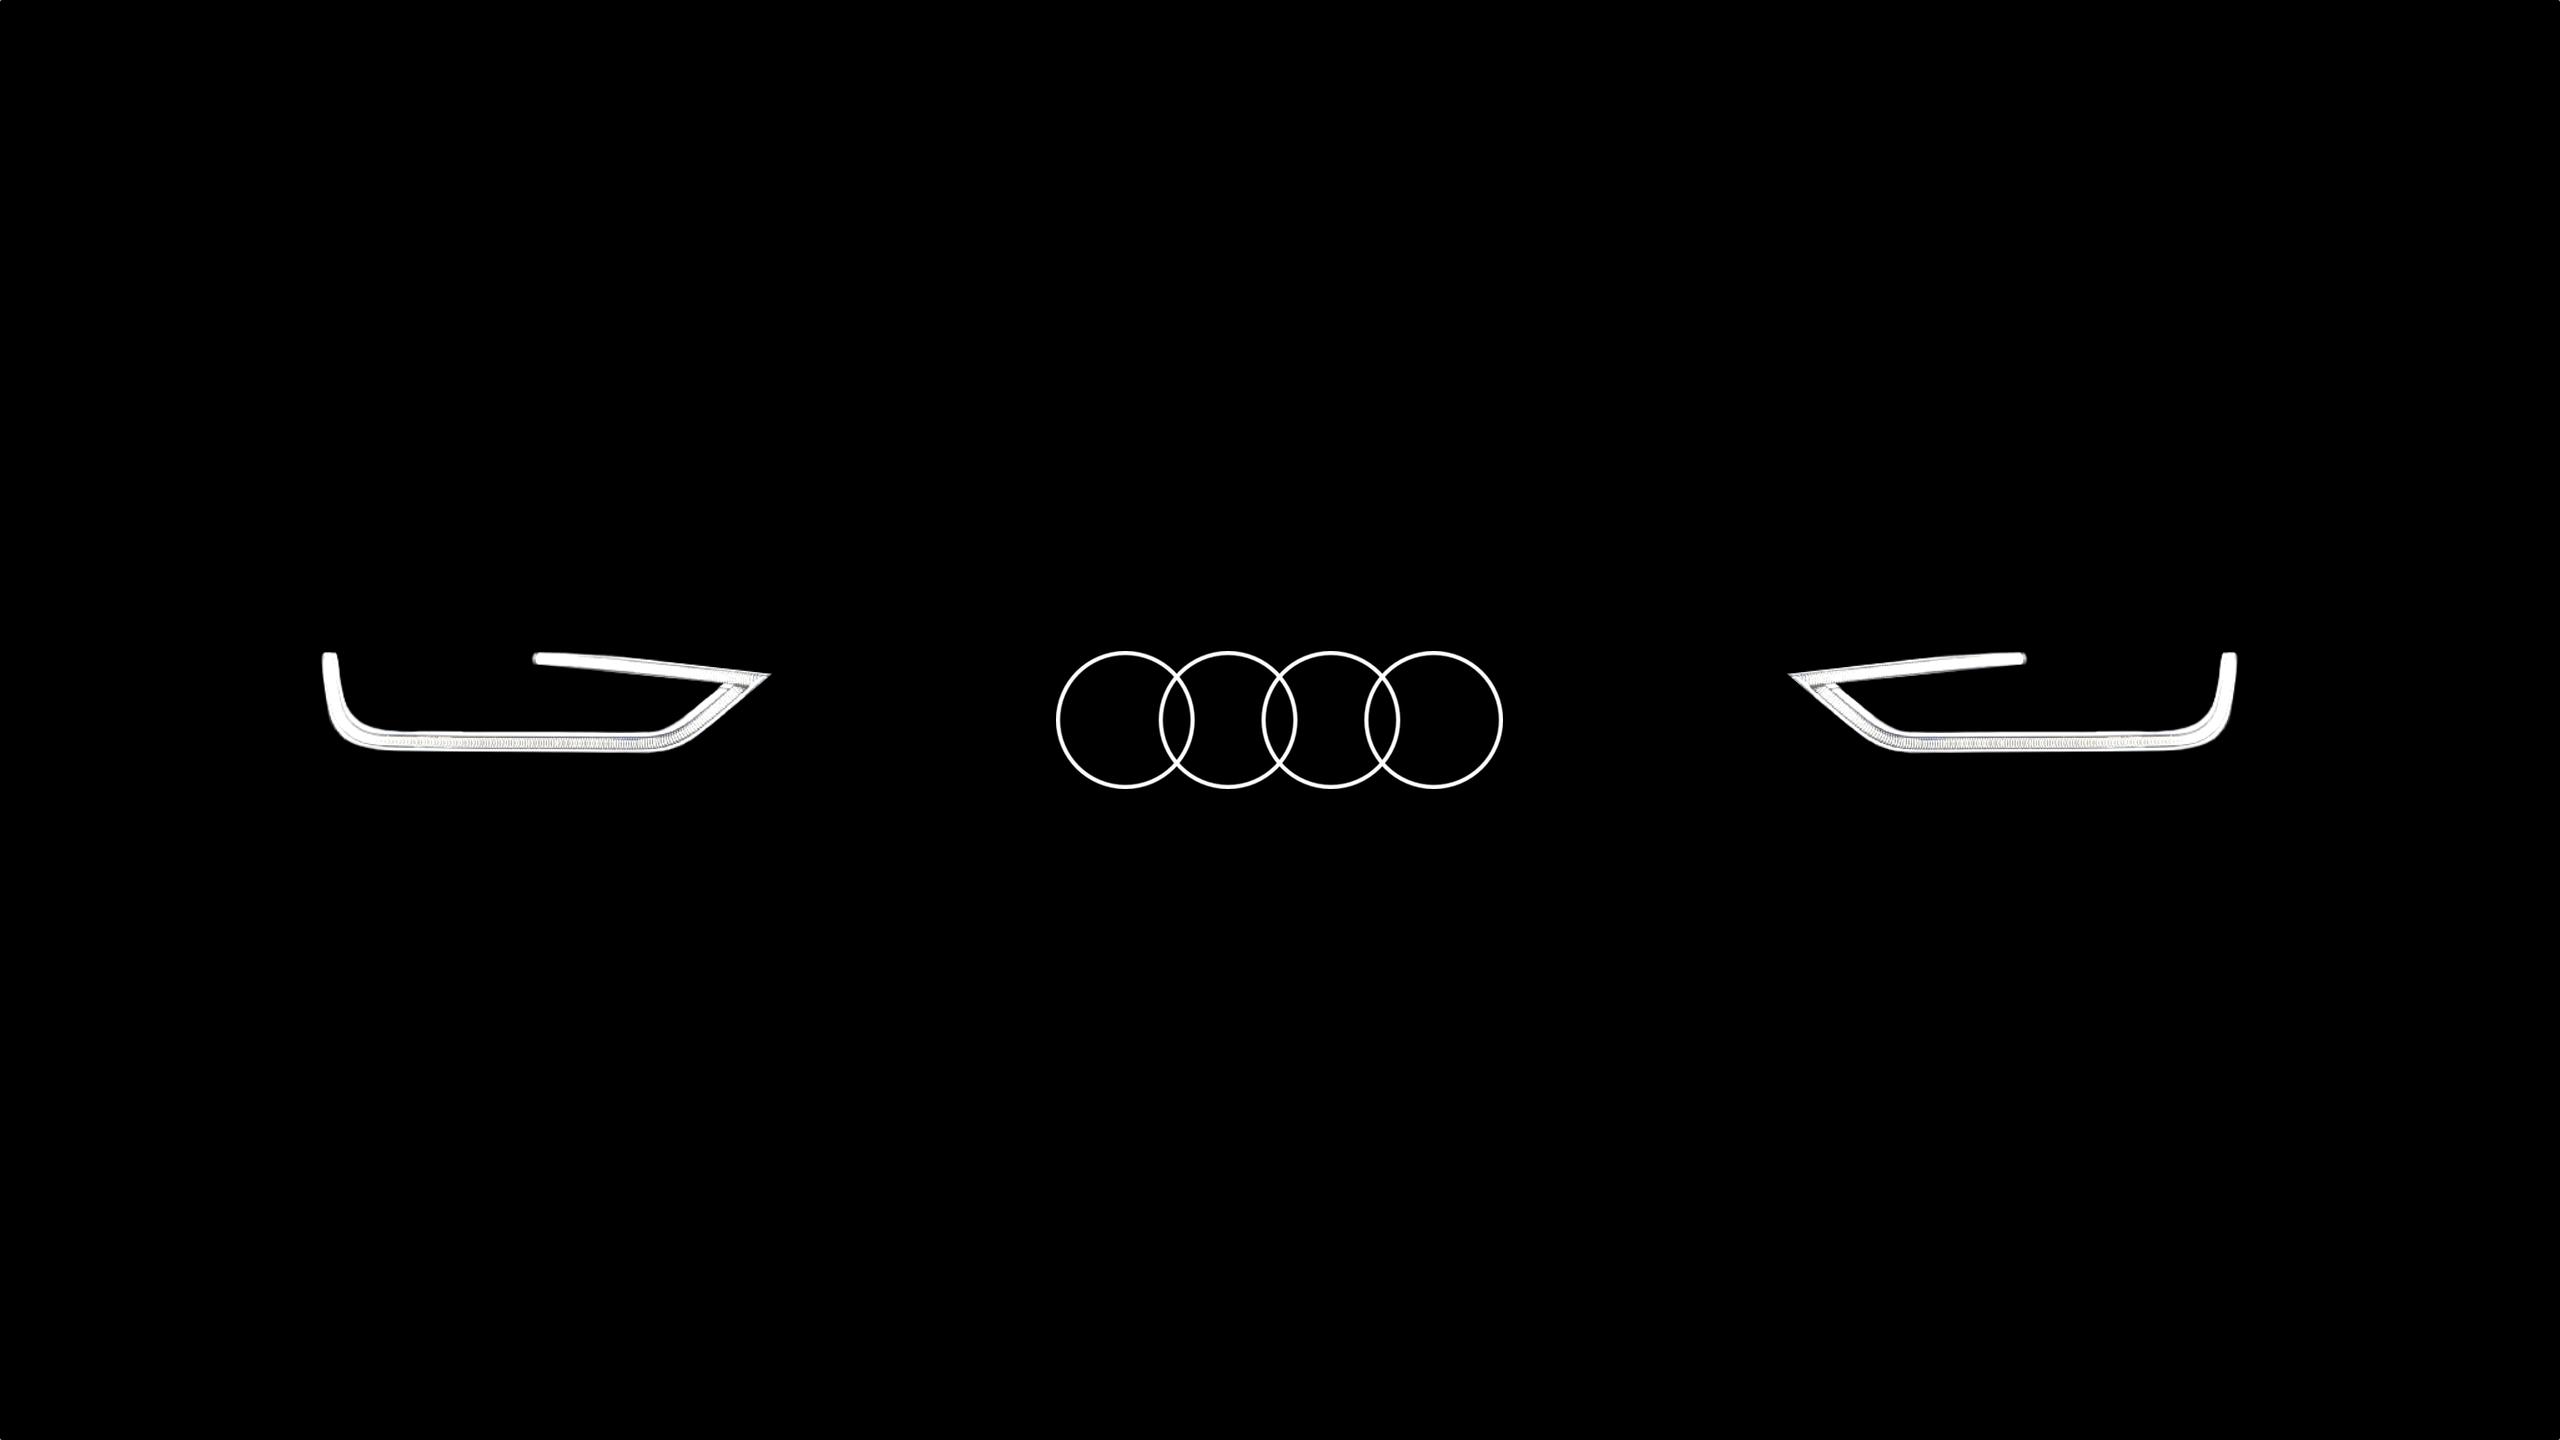 Audi Wallpapers For Free